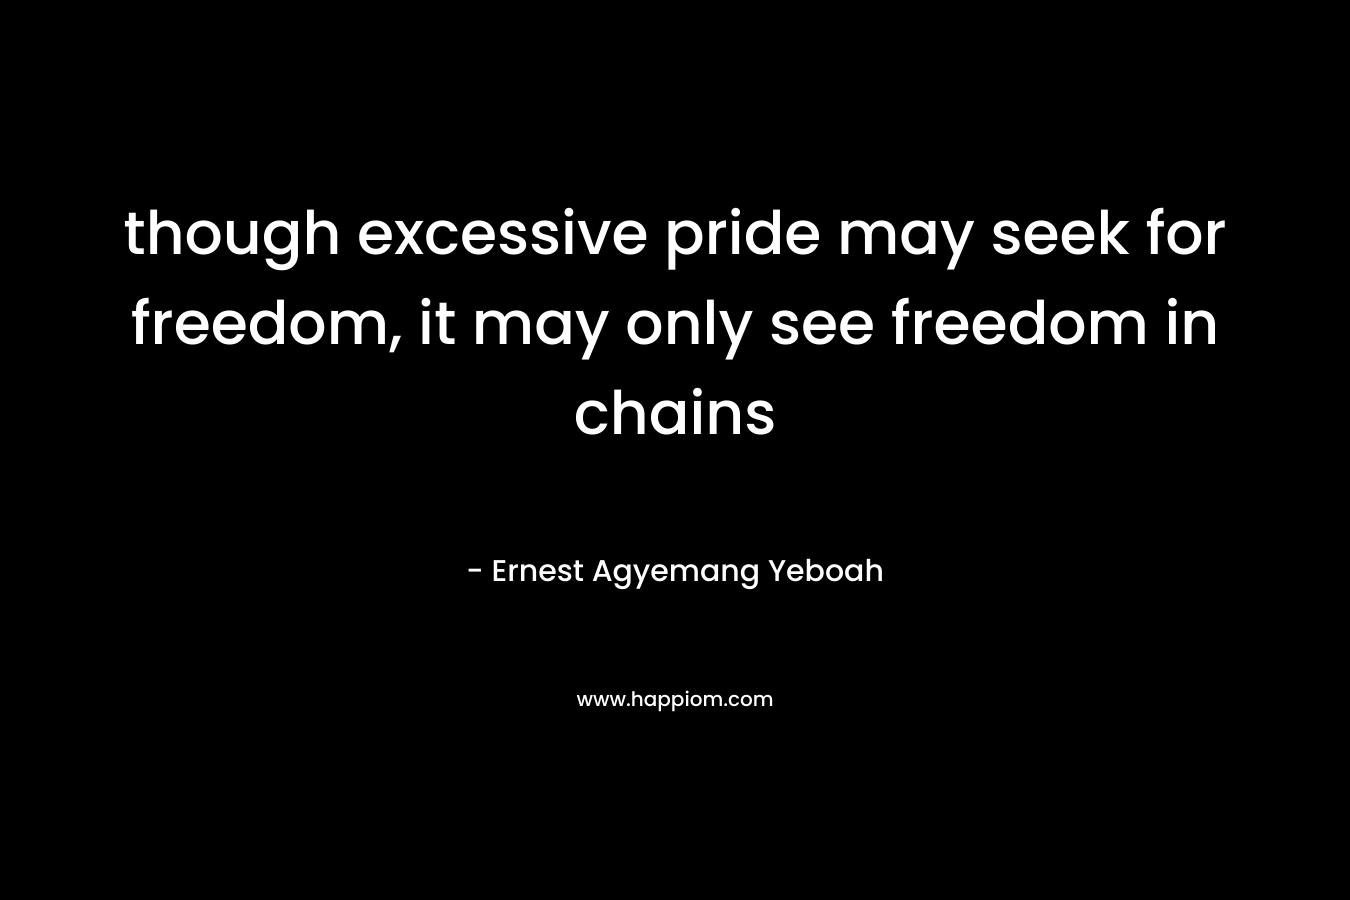 though excessive pride may seek for freedom, it may only see freedom in chains – Ernest Agyemang Yeboah